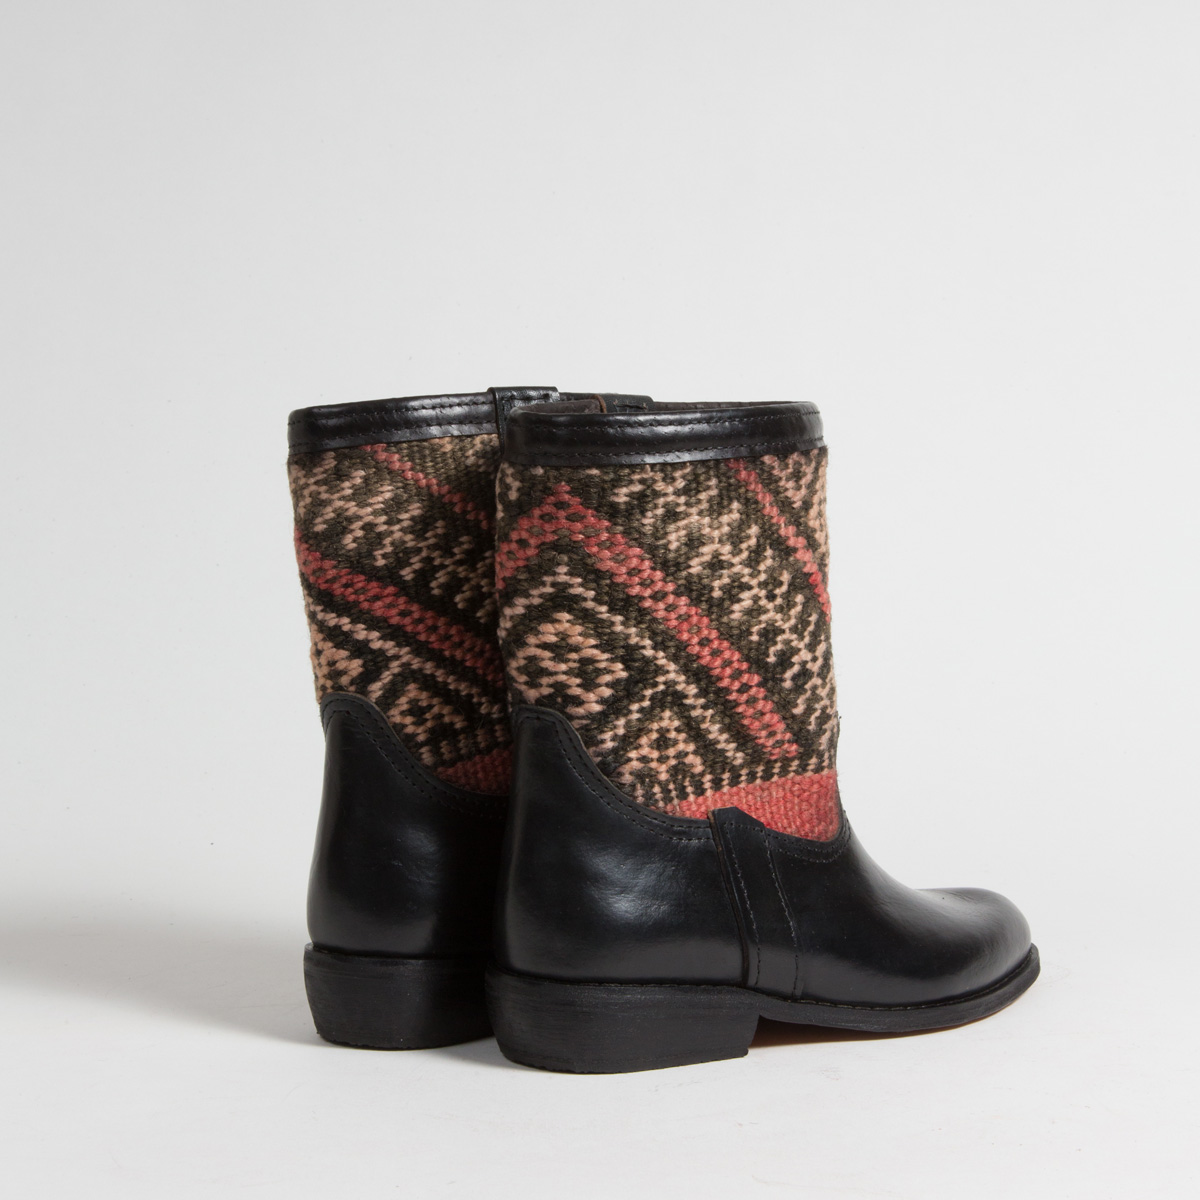 Bottines Kilim cuir mababouche artisanales (Réf. RPN2-36)